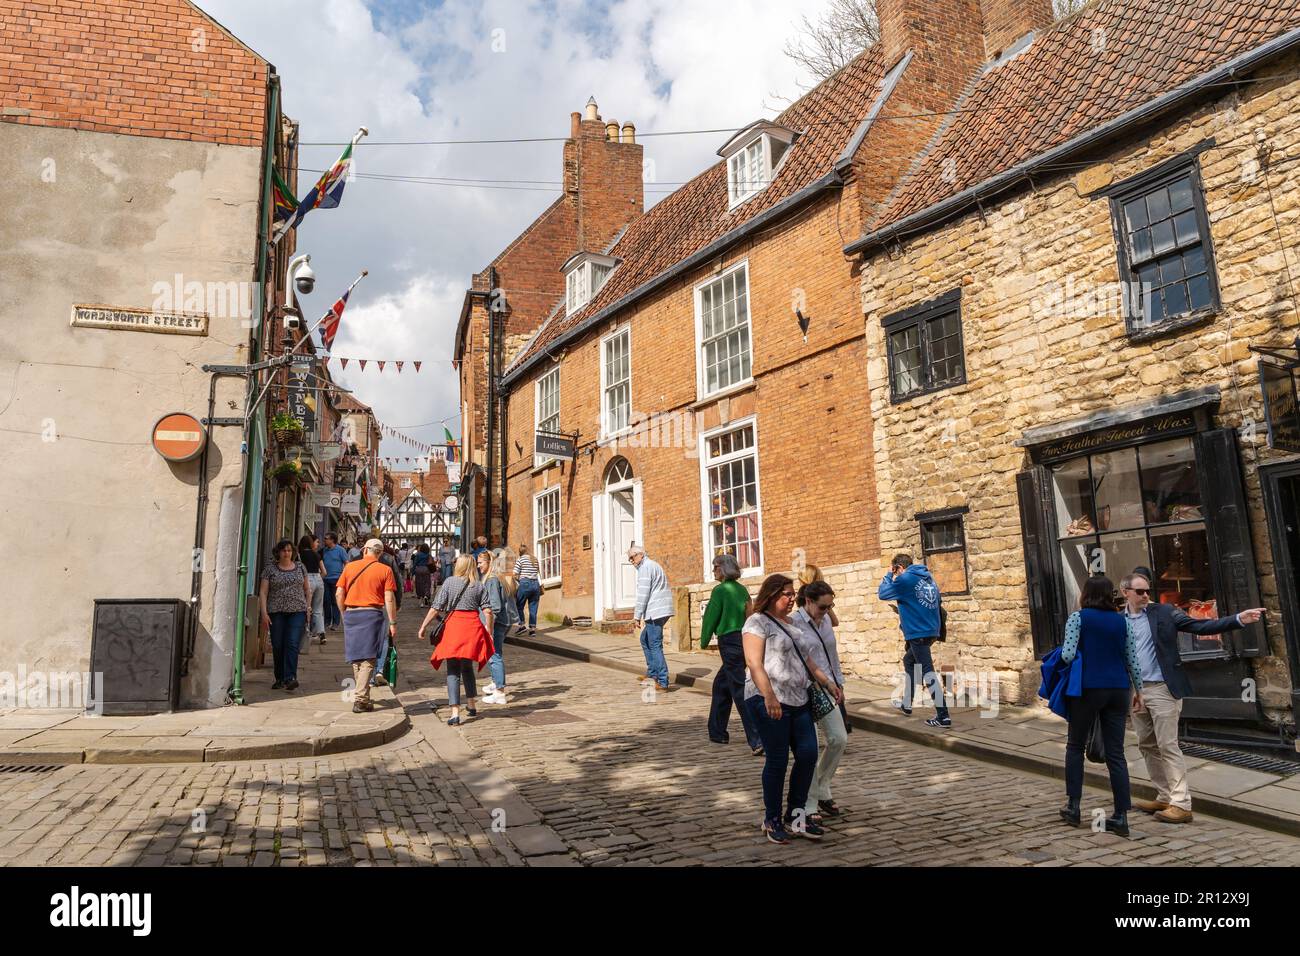 People walking Steep Hill, Lincoln, UK, a popular tourist attraction in the city, due to its independent retailers and olde worlde charm. Stock Photo